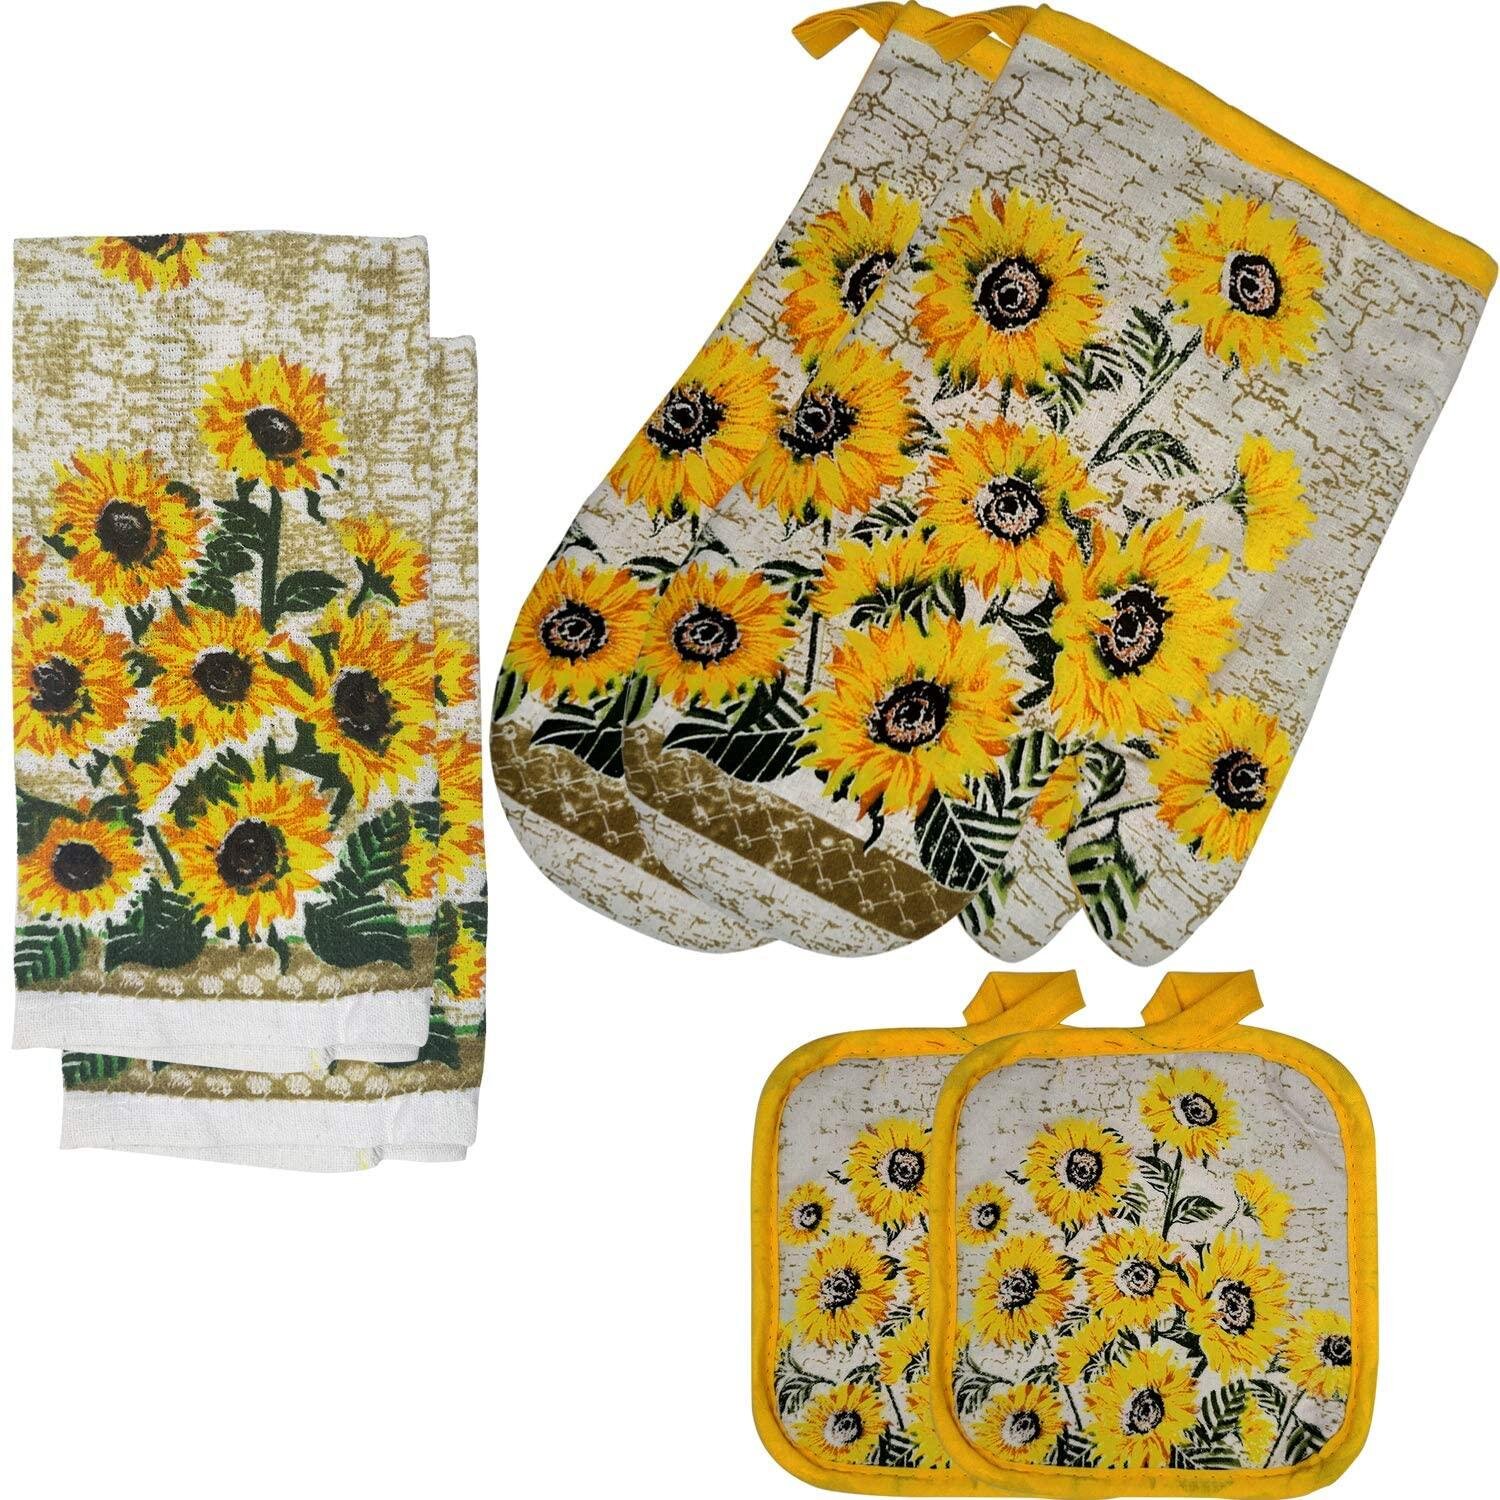 SL ROOSTER & SUNFLOWERS 2 POT HOLDERS,2 TOWELS & 1 OVEN MITT 5 pc KITCHEN SET 